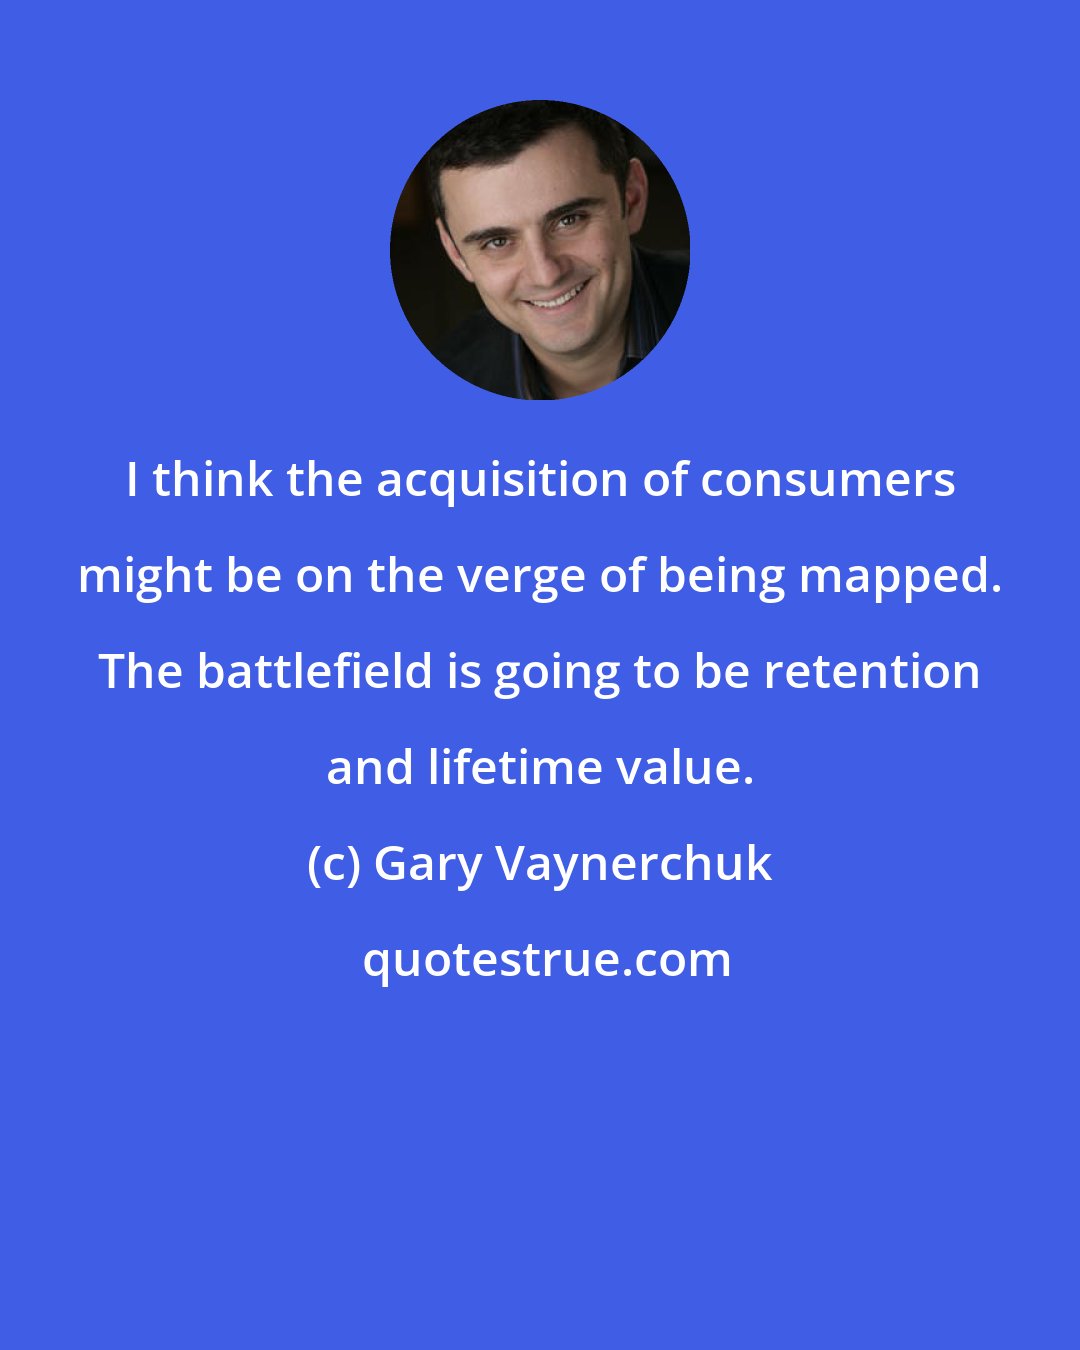 Gary Vaynerchuk: I think the acquisition of consumers might be on the verge of being mapped. The battlefield is going to be retention and lifetime value.